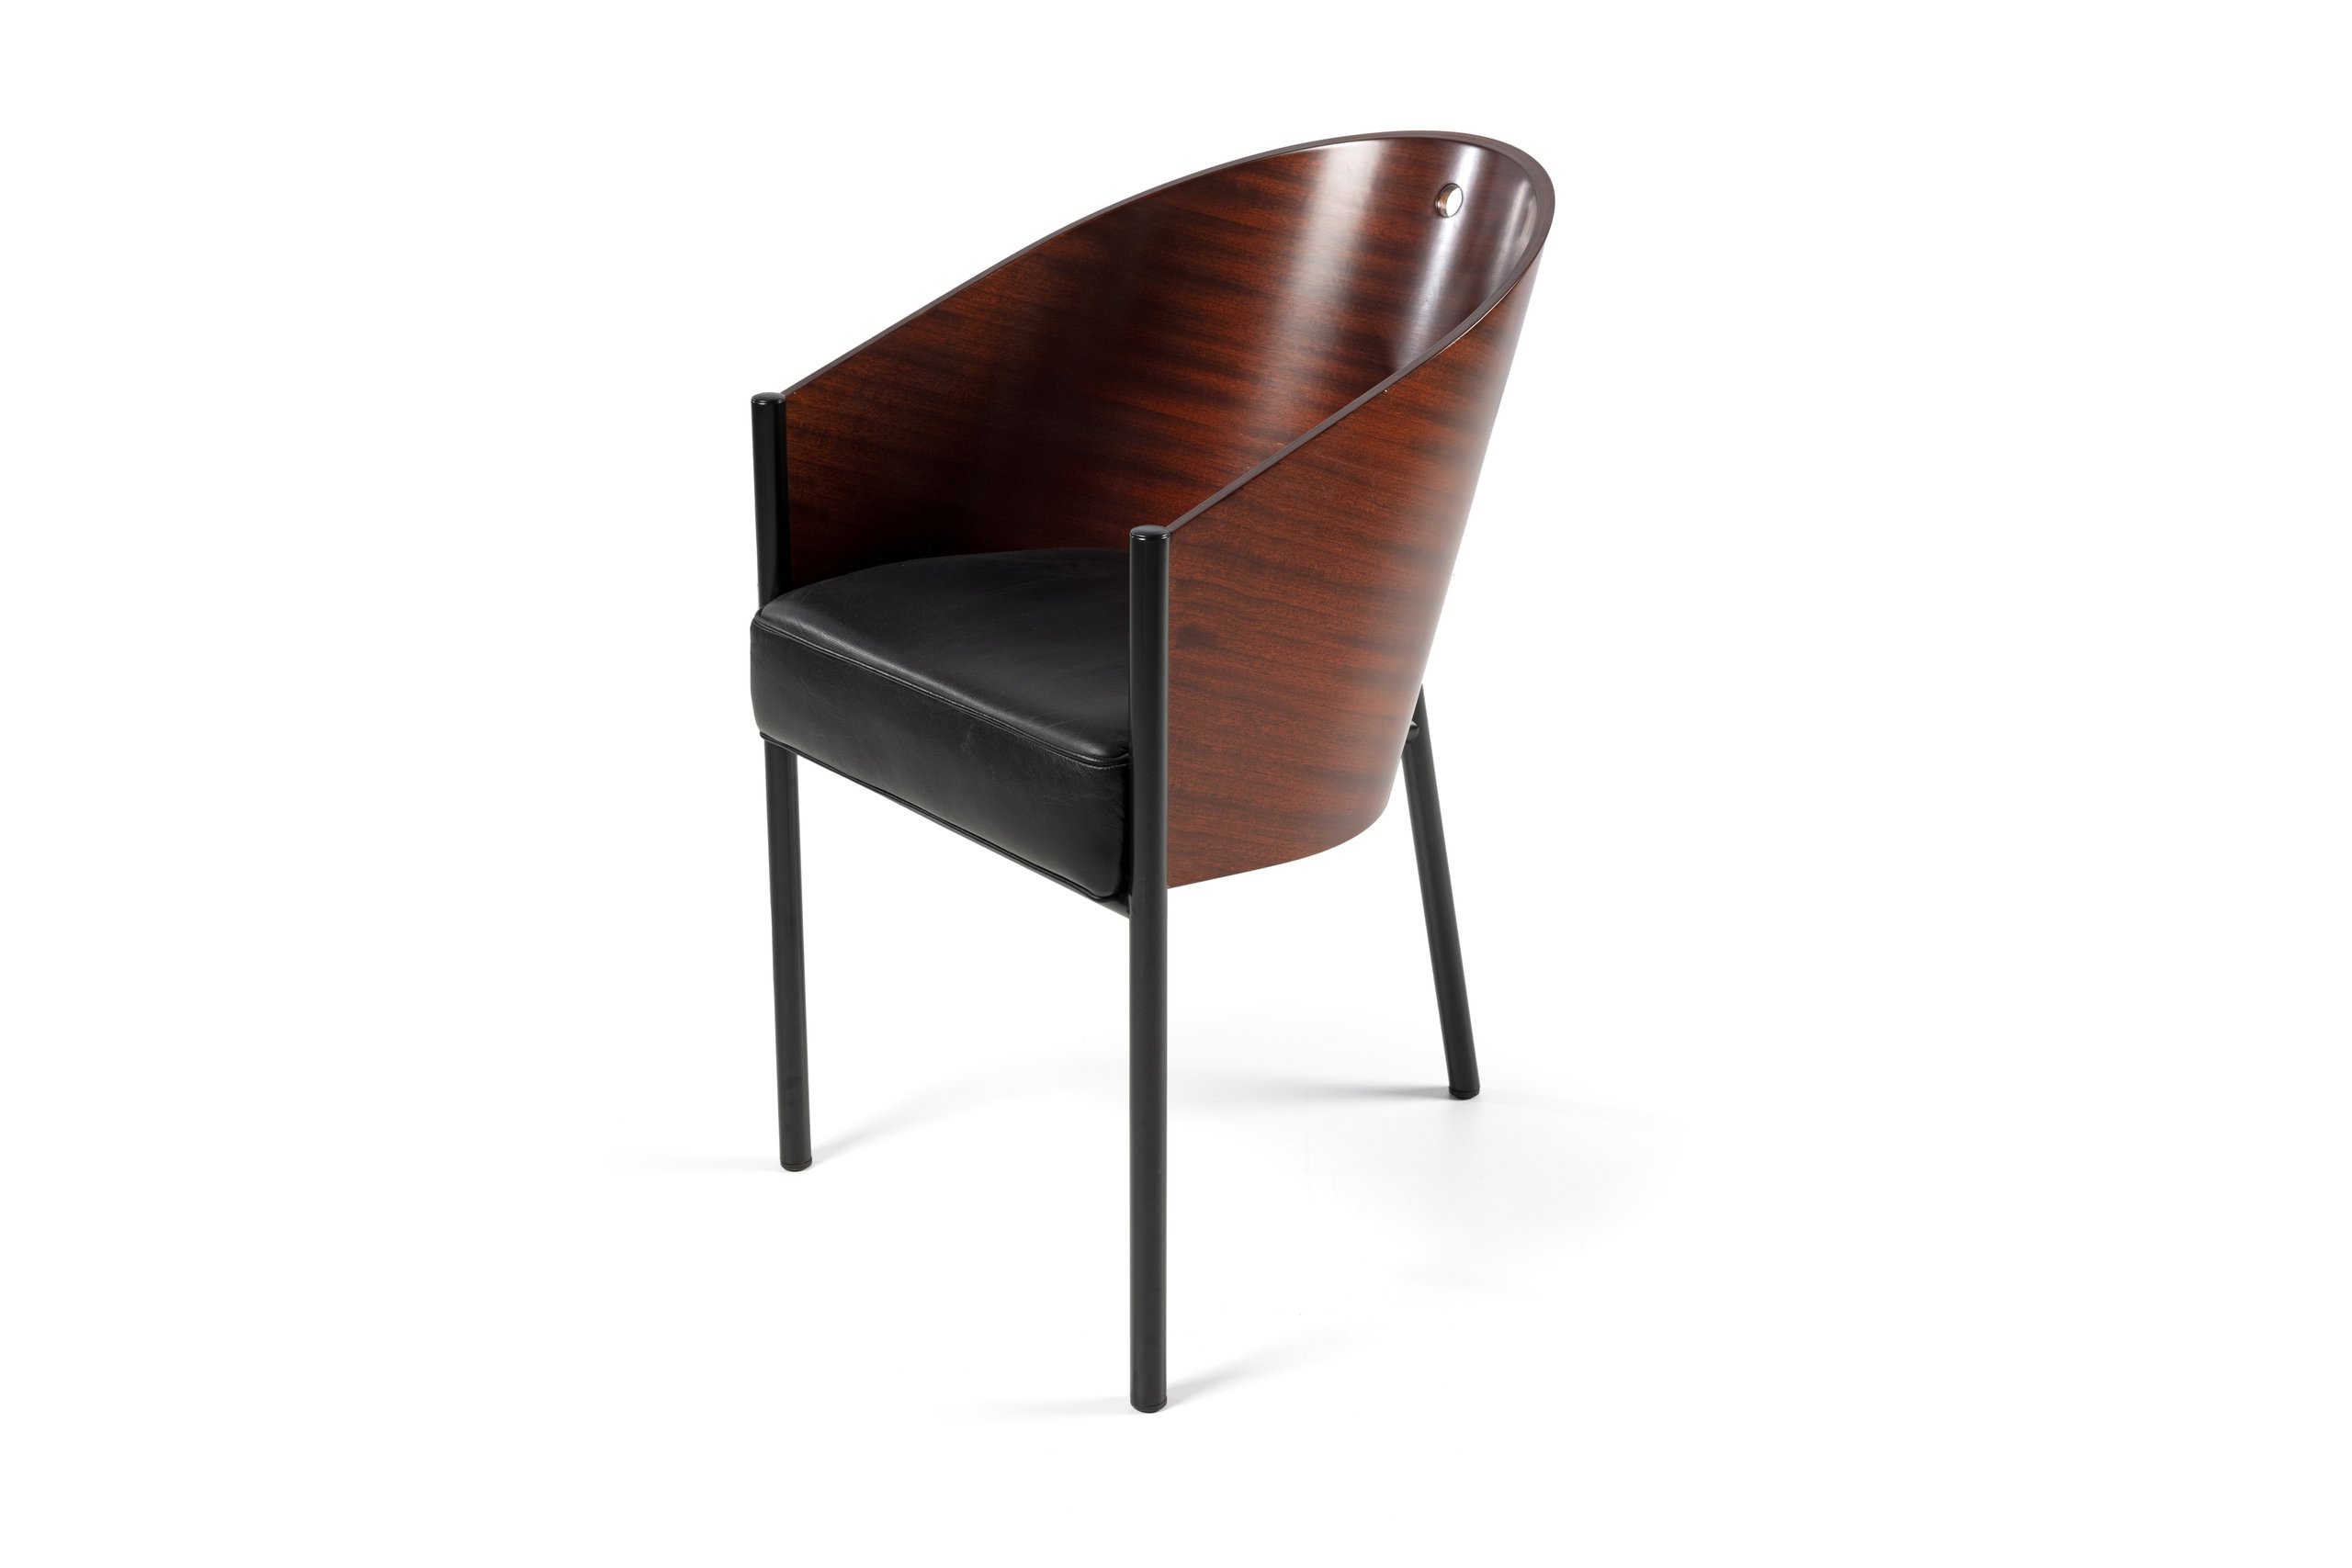 Cafe Costes chair by Philippe Starck